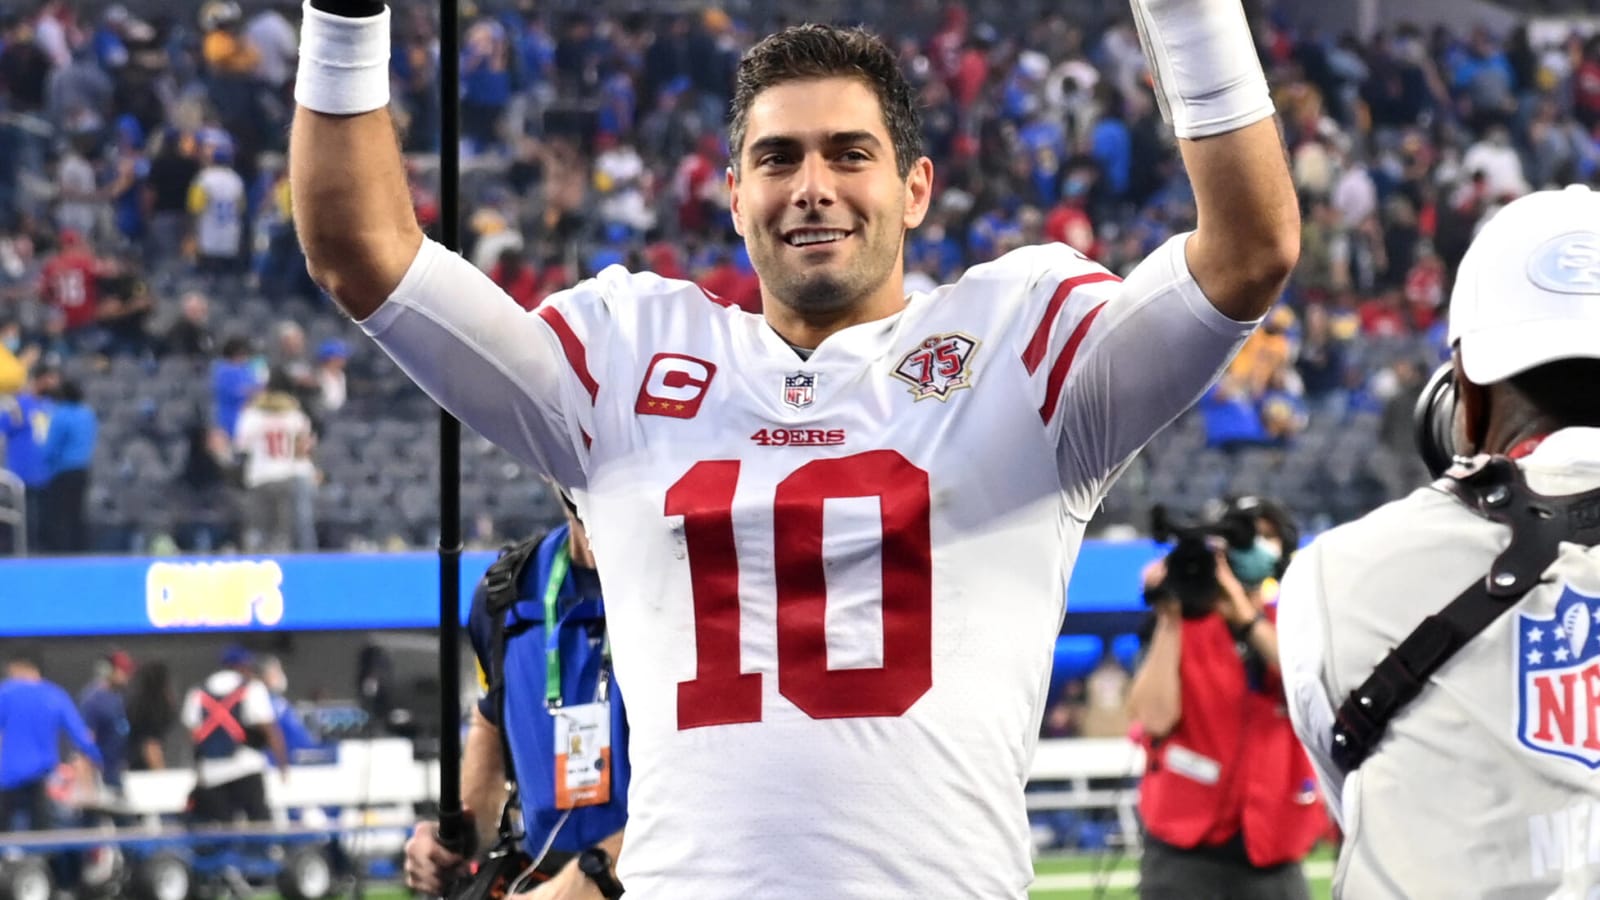 Teams waiting to trade for Garoppolo due to 49ers' cap issues?